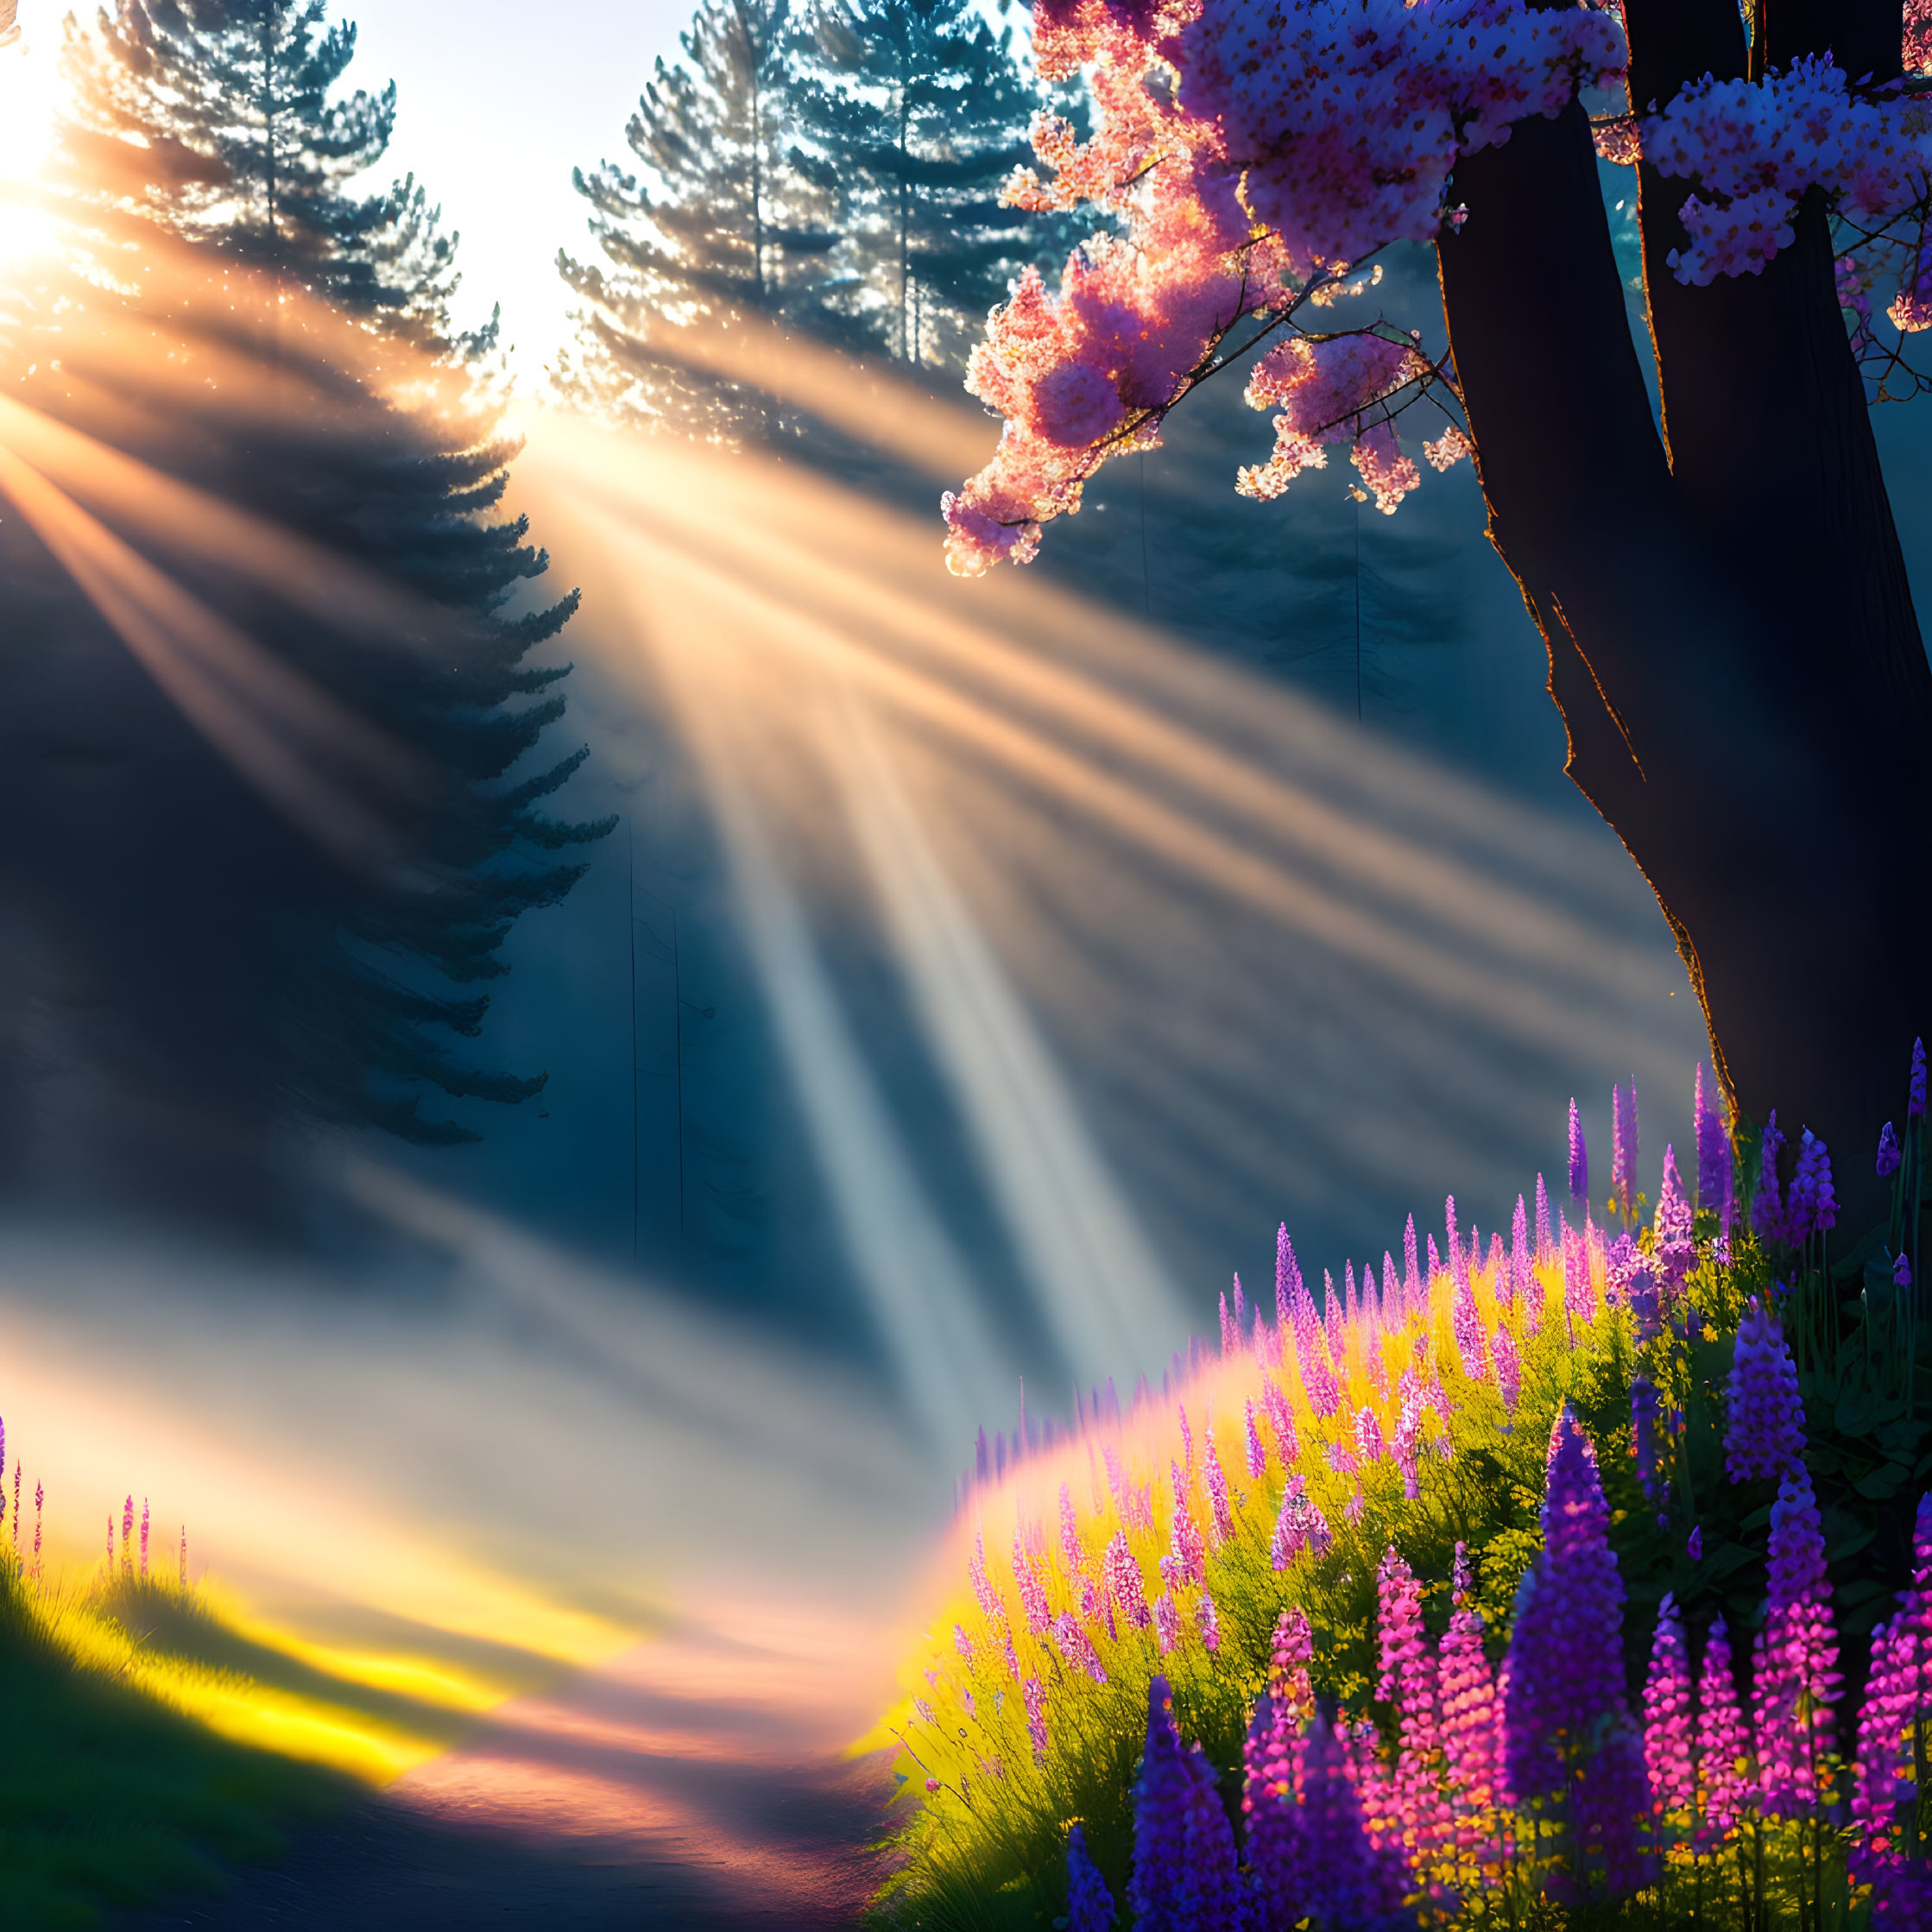 Forest path illuminated by sun rays and purple flowers.